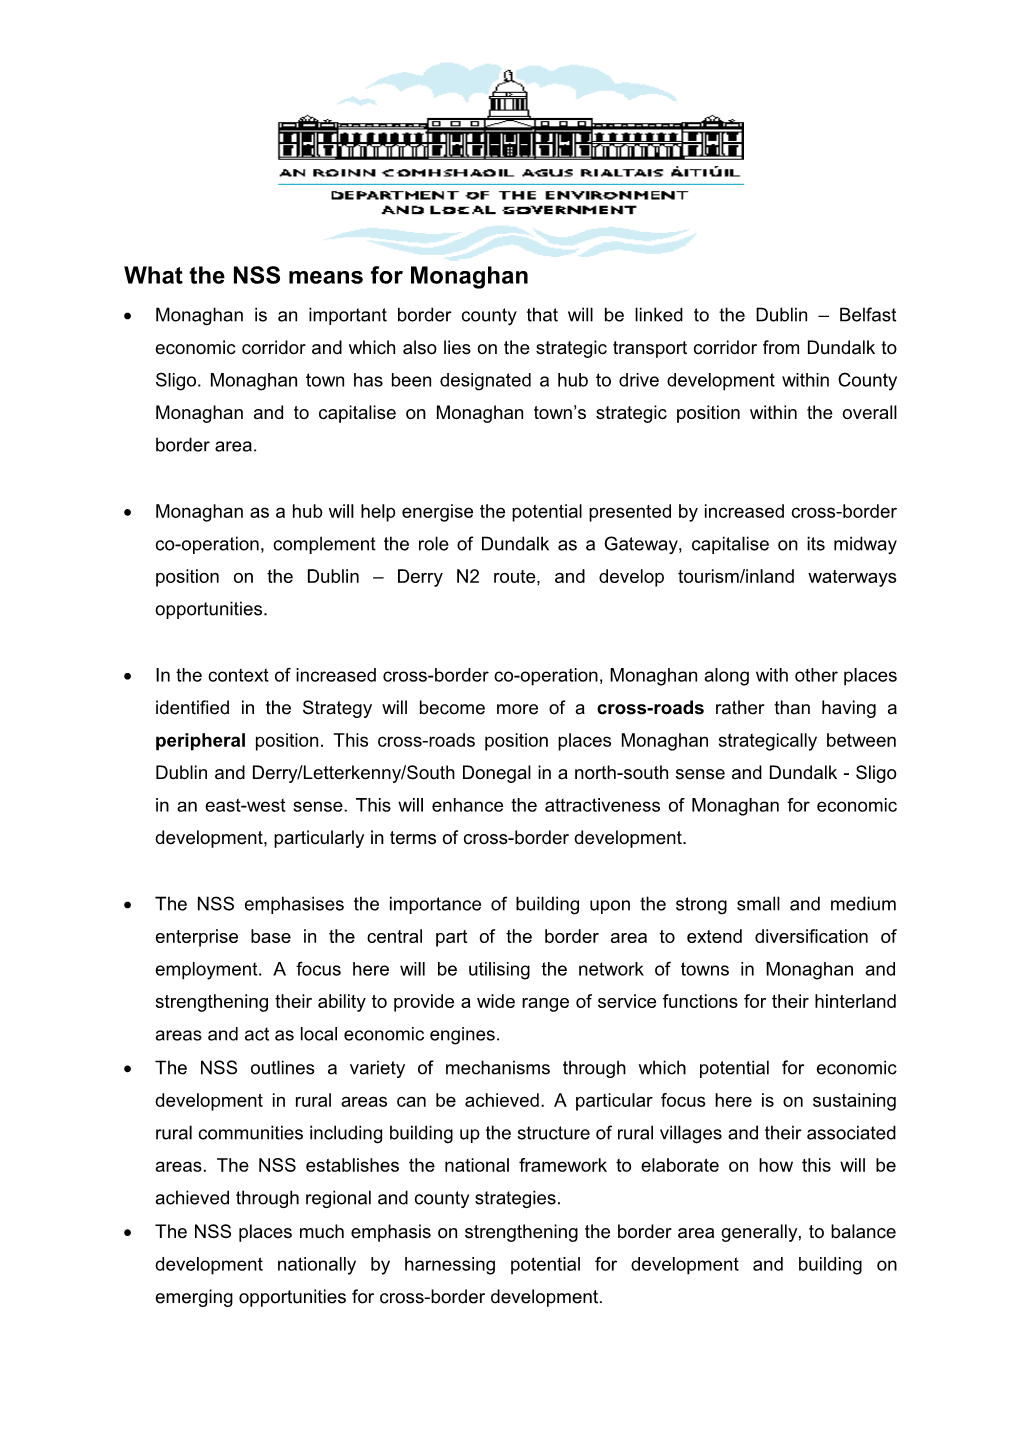 What the NSS Means for Monaghan